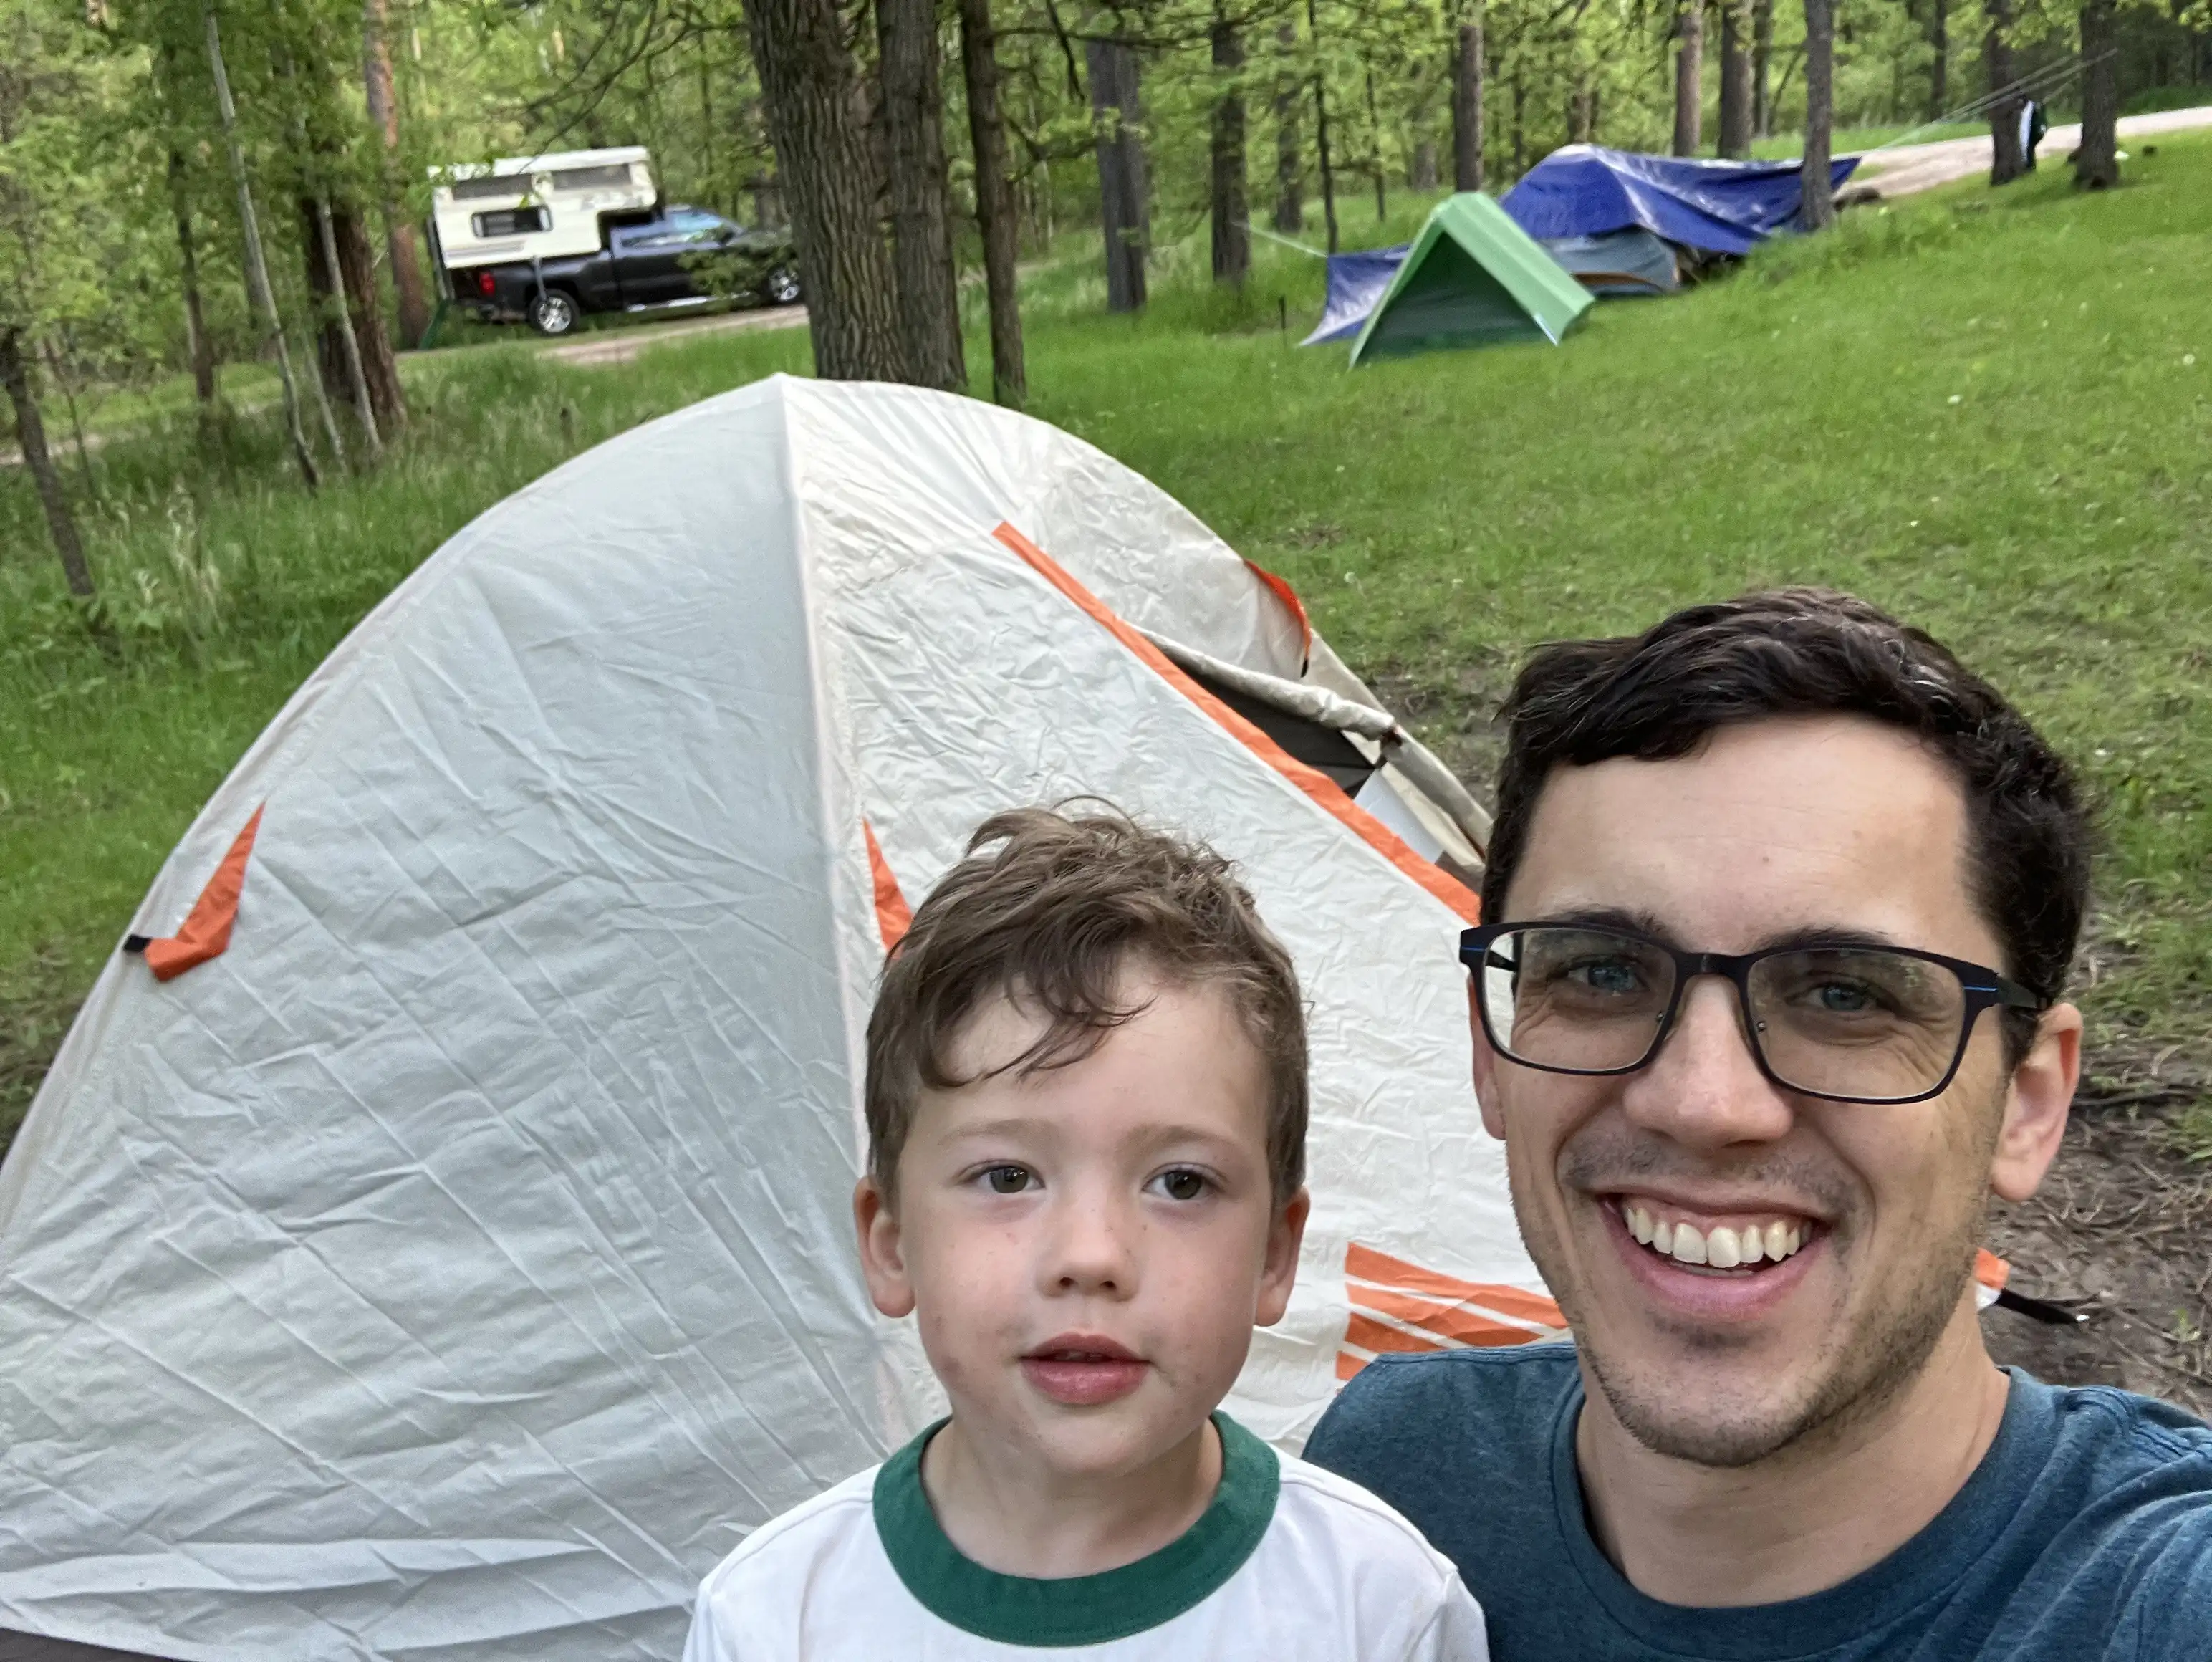 Graham and Alex in front of their tent at Grizzly Bear Primitive campsite #10.